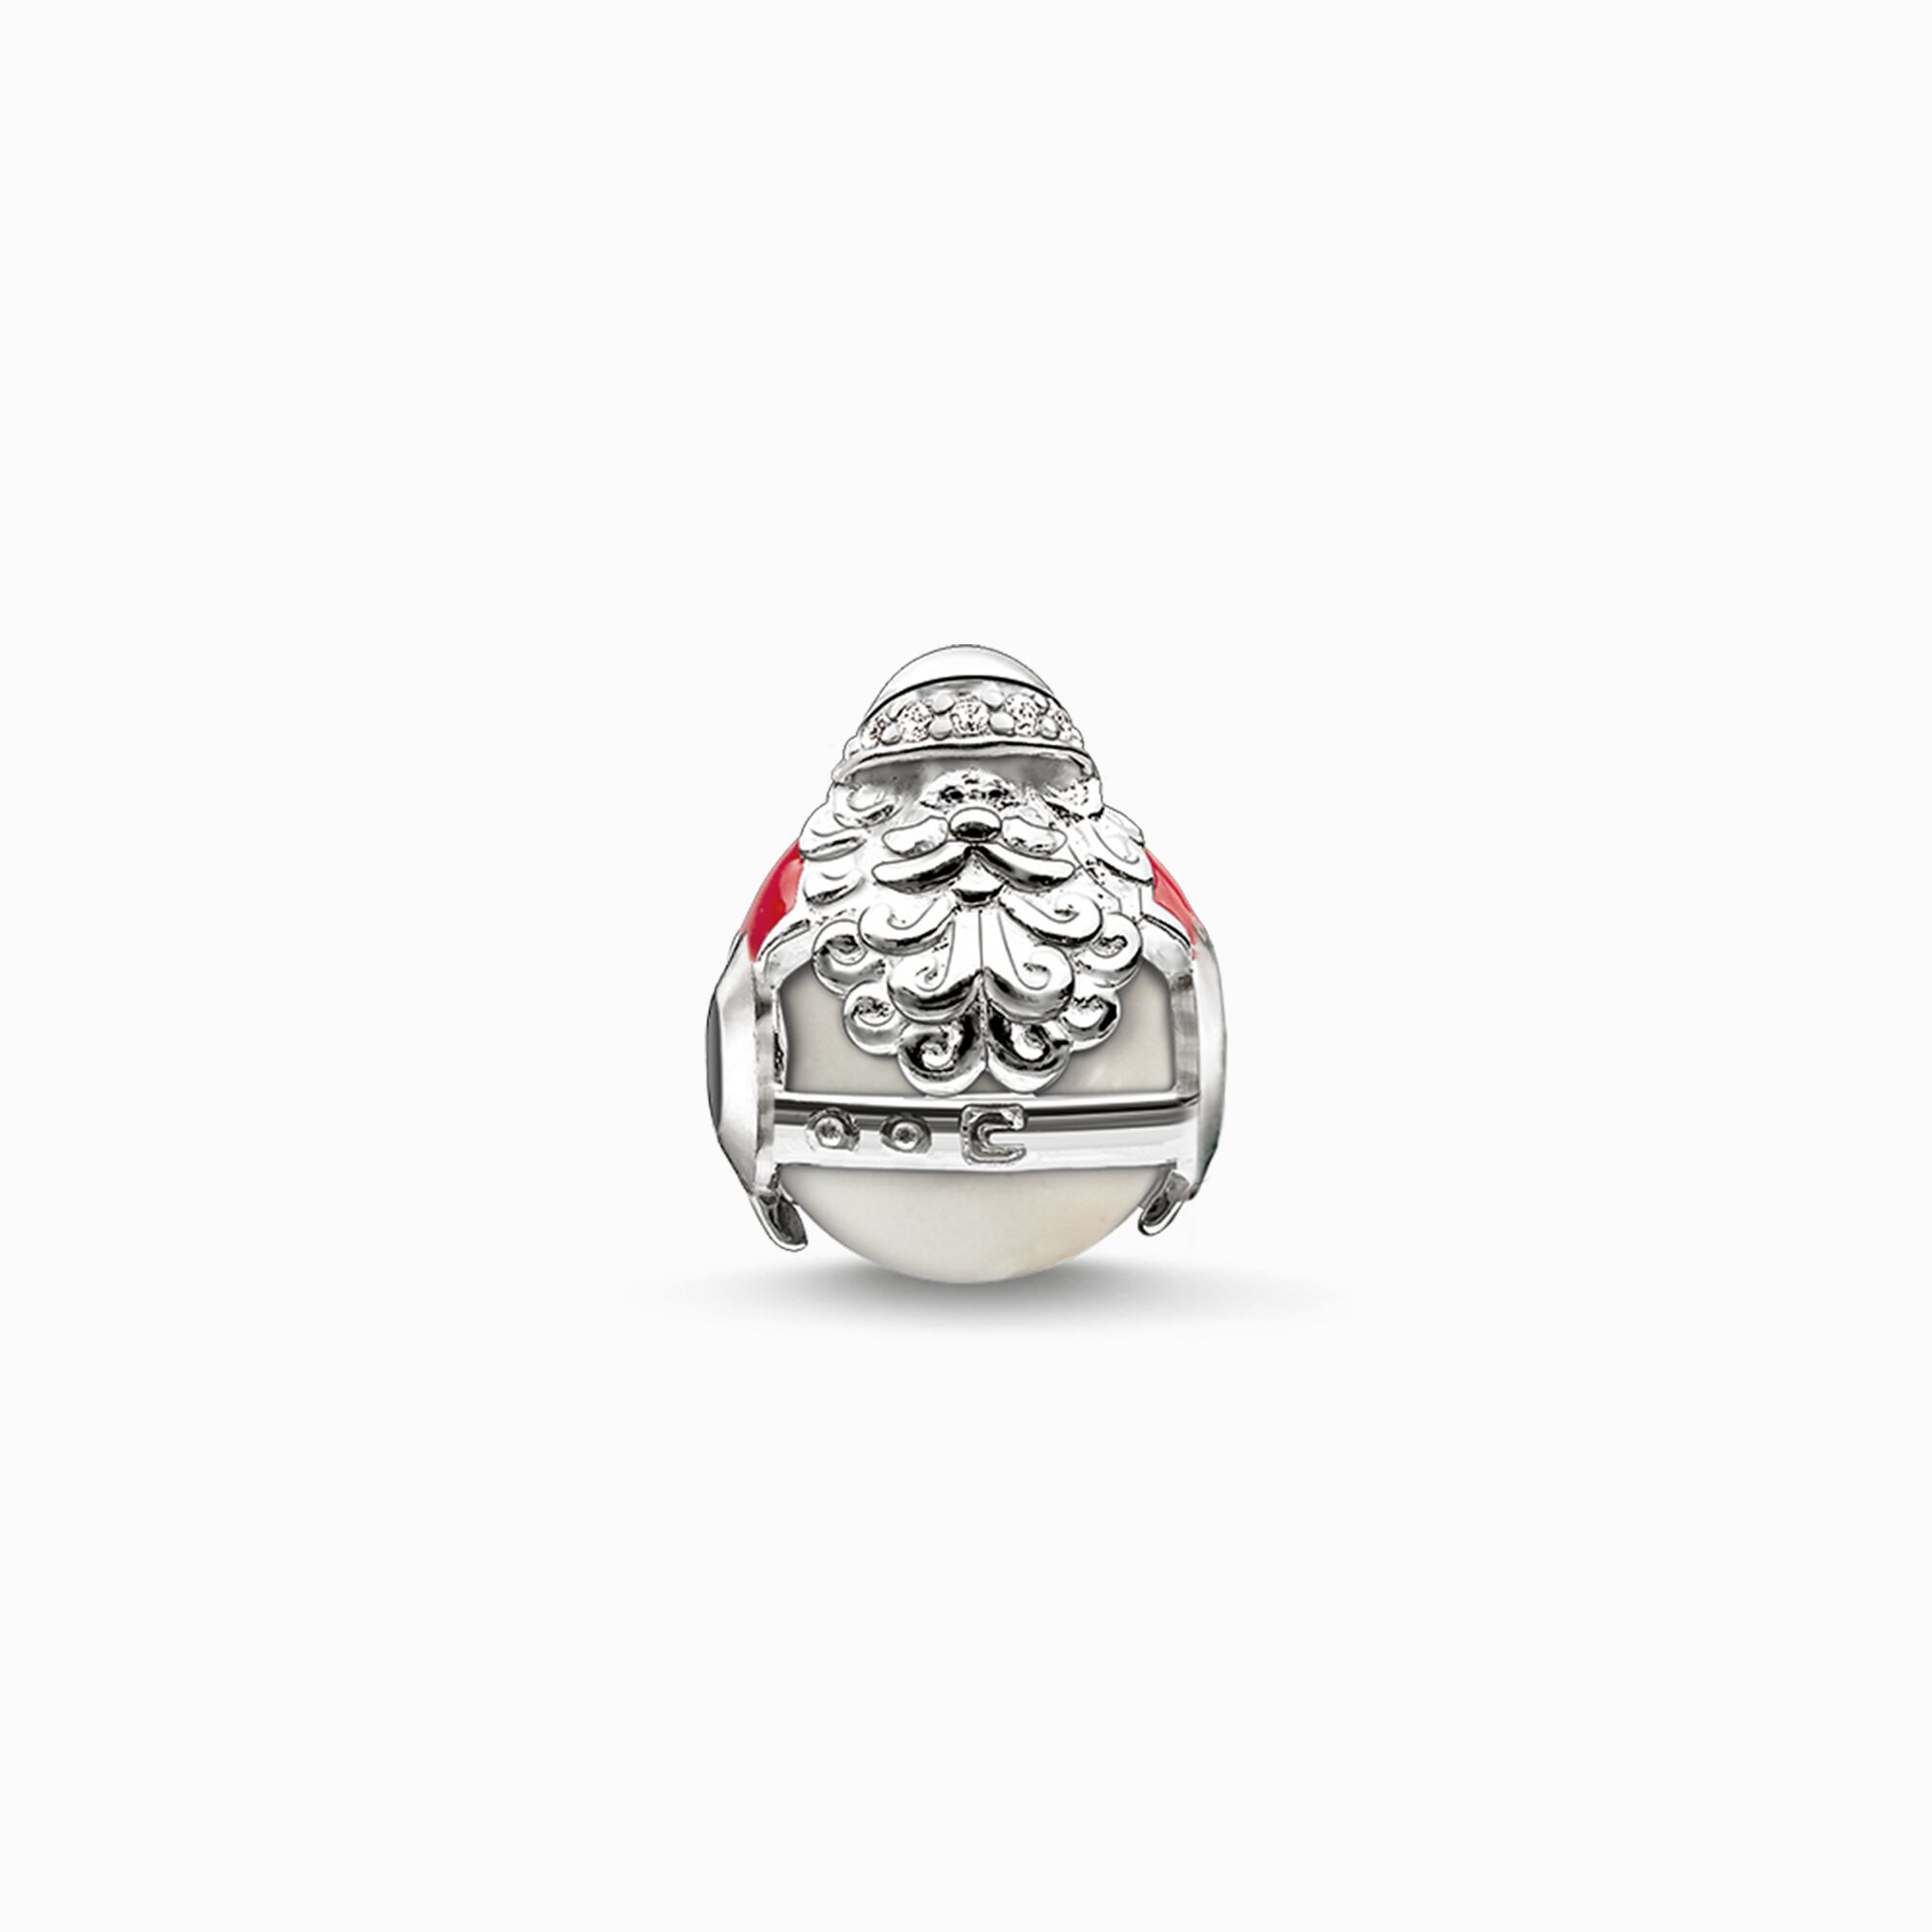 Bead Santa Claus from the Karma Beads collection in the THOMAS SABO online store